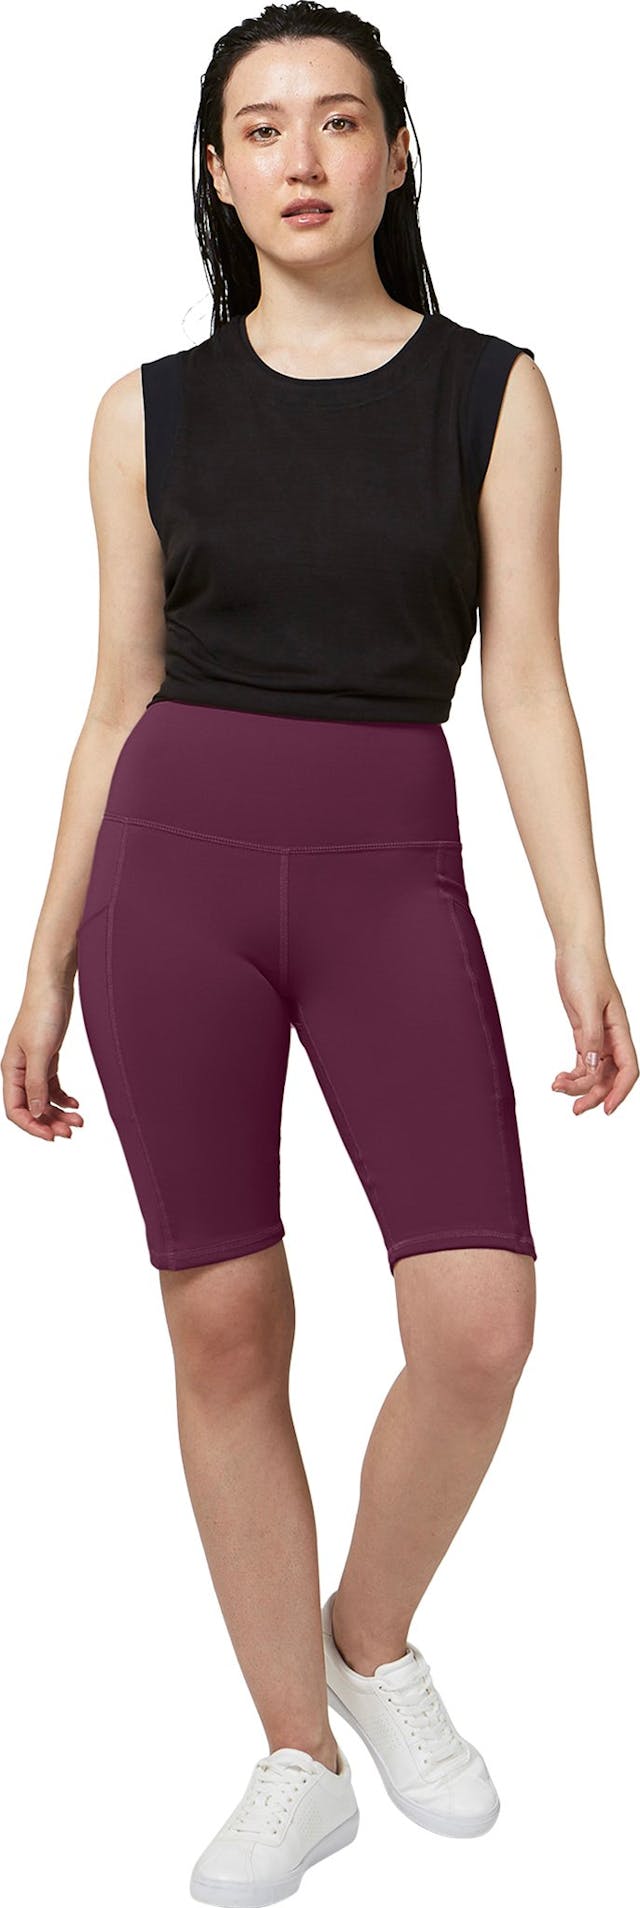 Product image for Bloomfield 10 In Bike Shorts - Women's